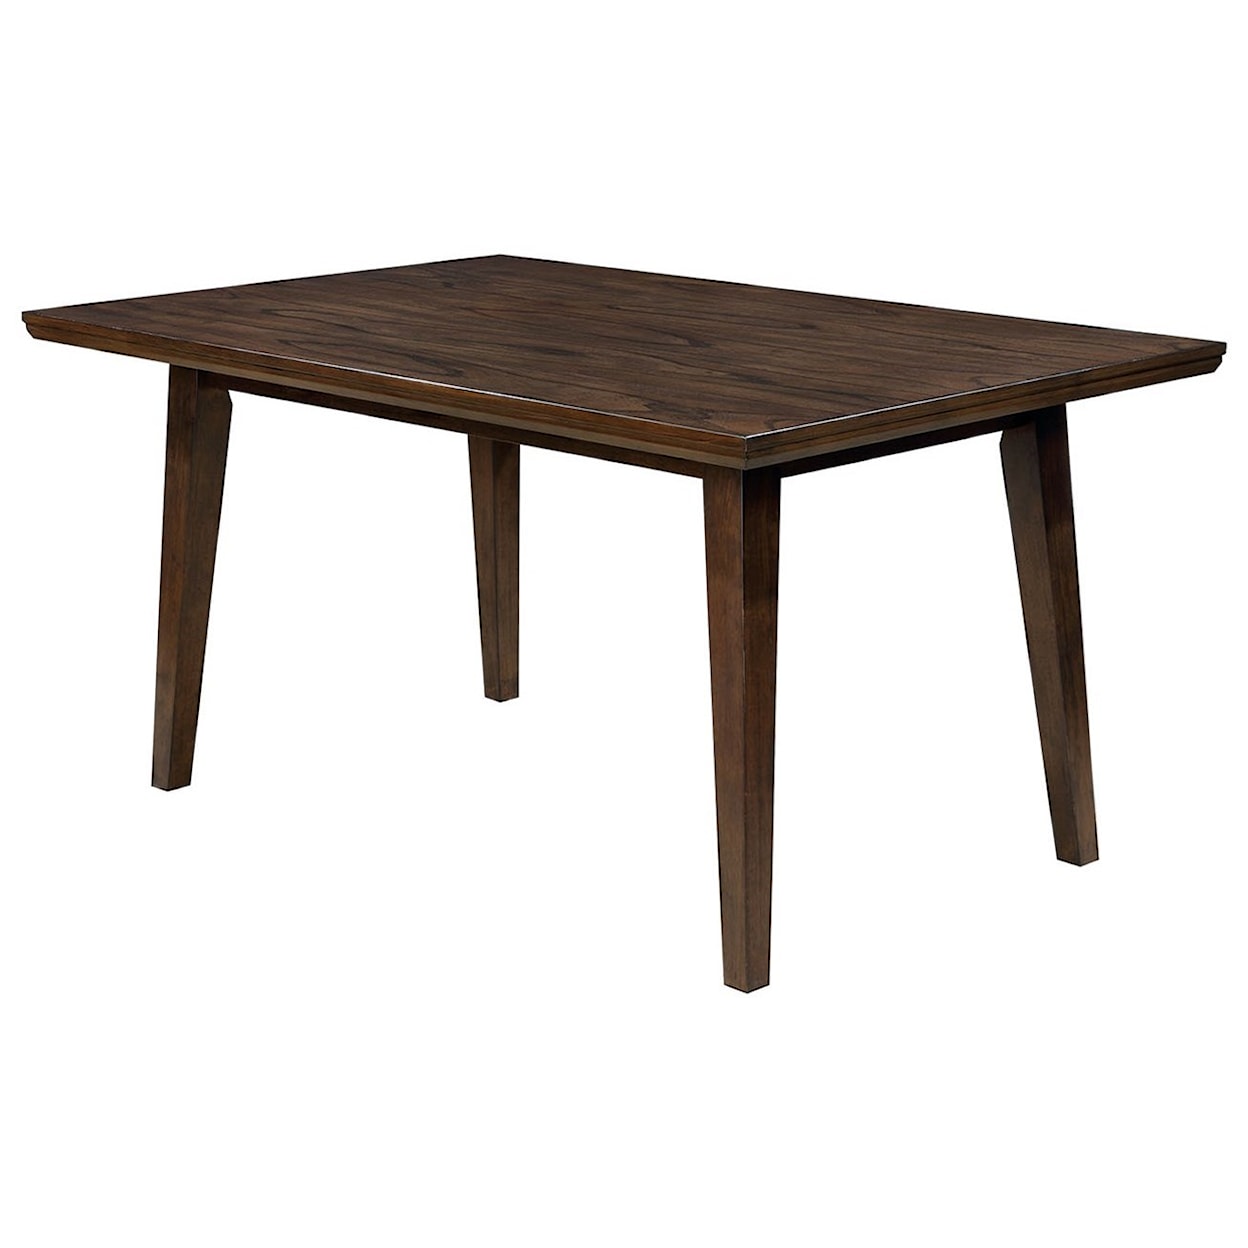 FUSA Abelone Dining Table